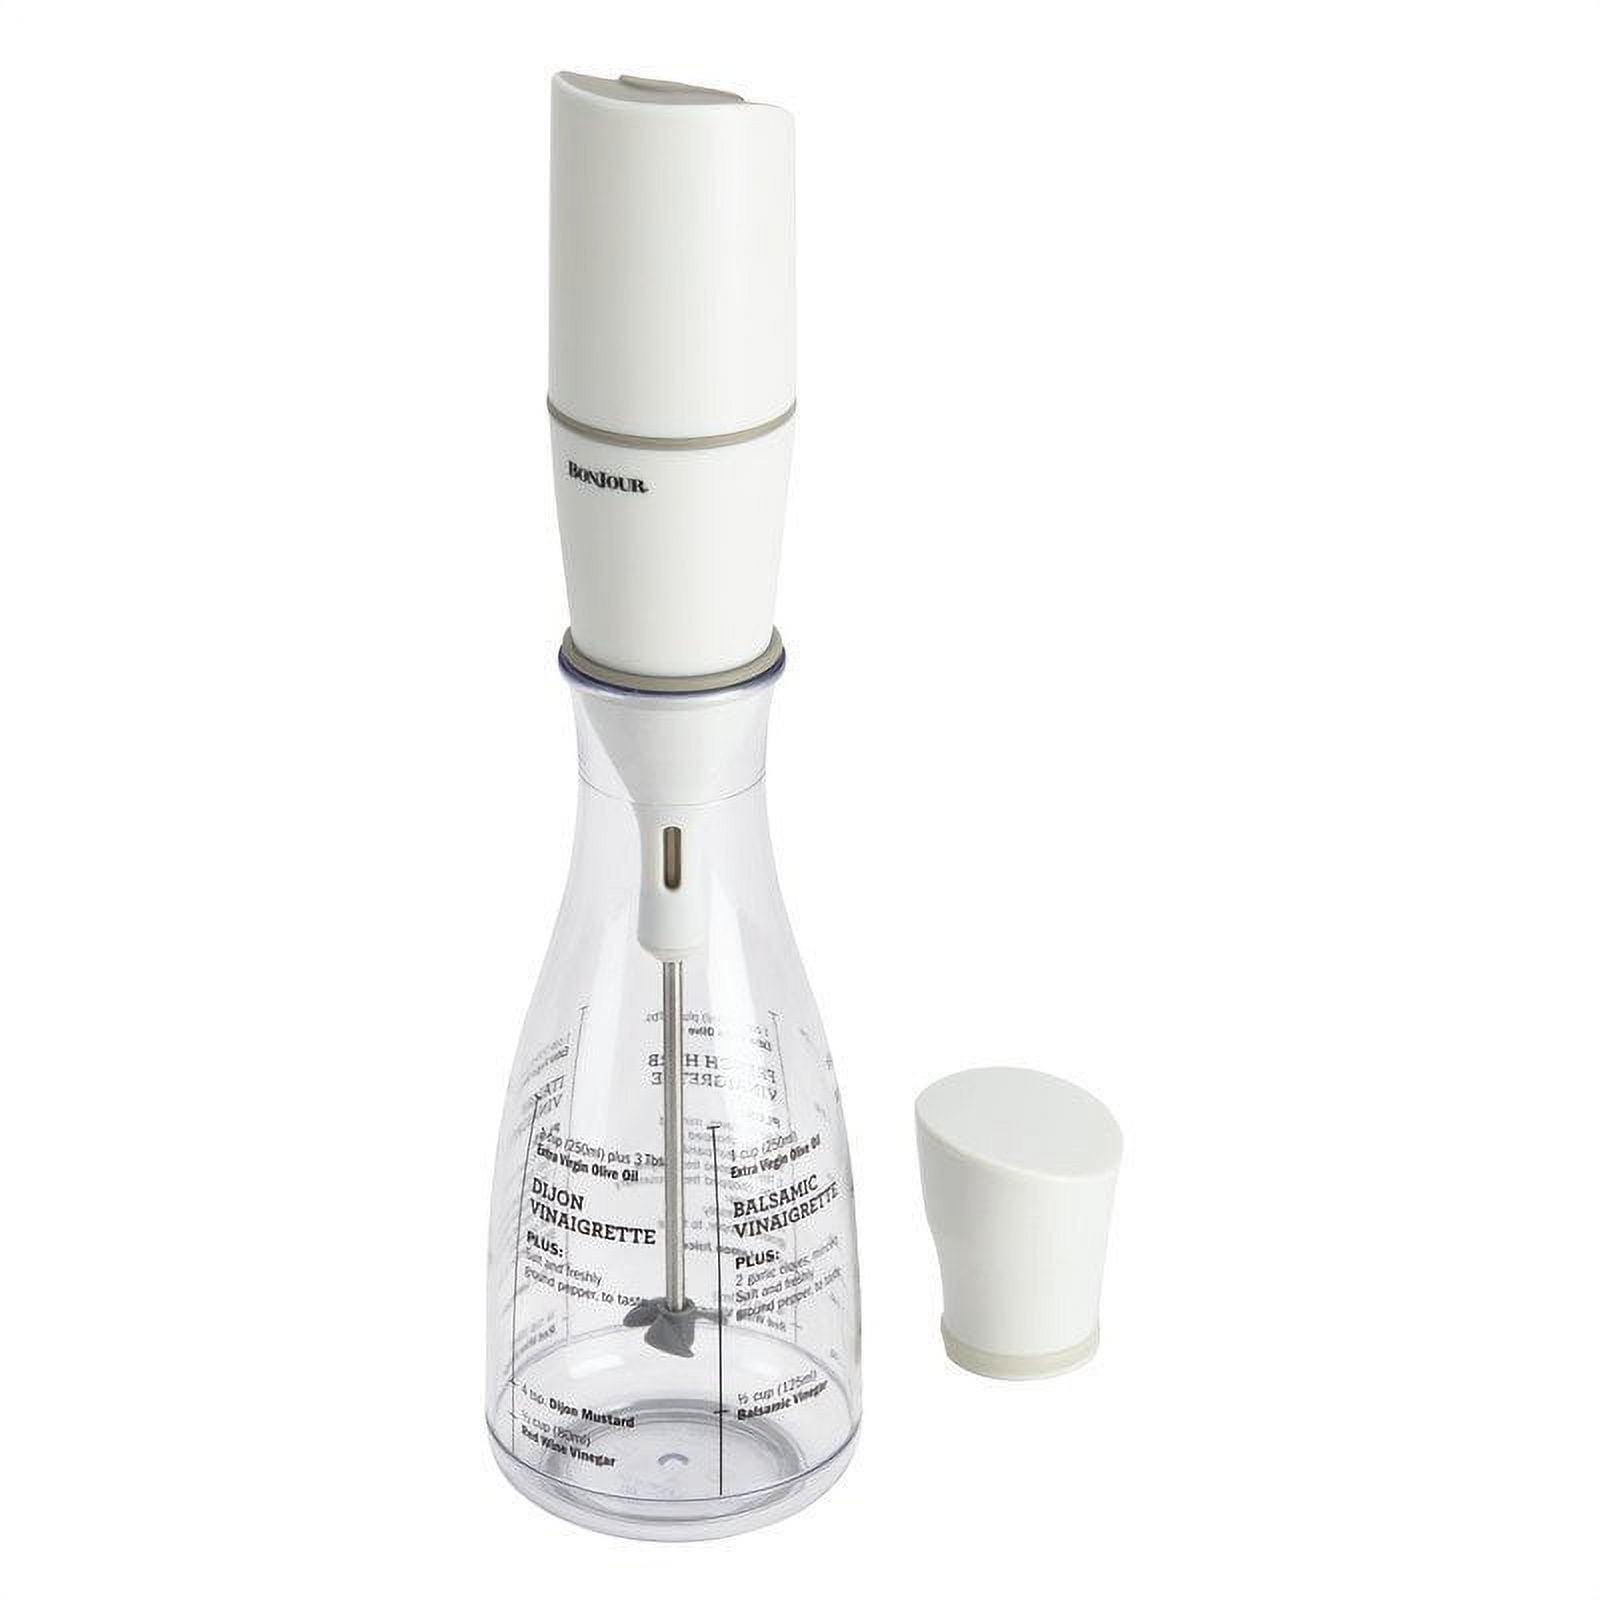 Salad Dressing Maker, 3.07x8.39 Inches Press Cup Salad Mixer, Salad Dressing Shaker, Manual Mixing Salad Cup for Restaurant Home Canteen Shop Kitchen